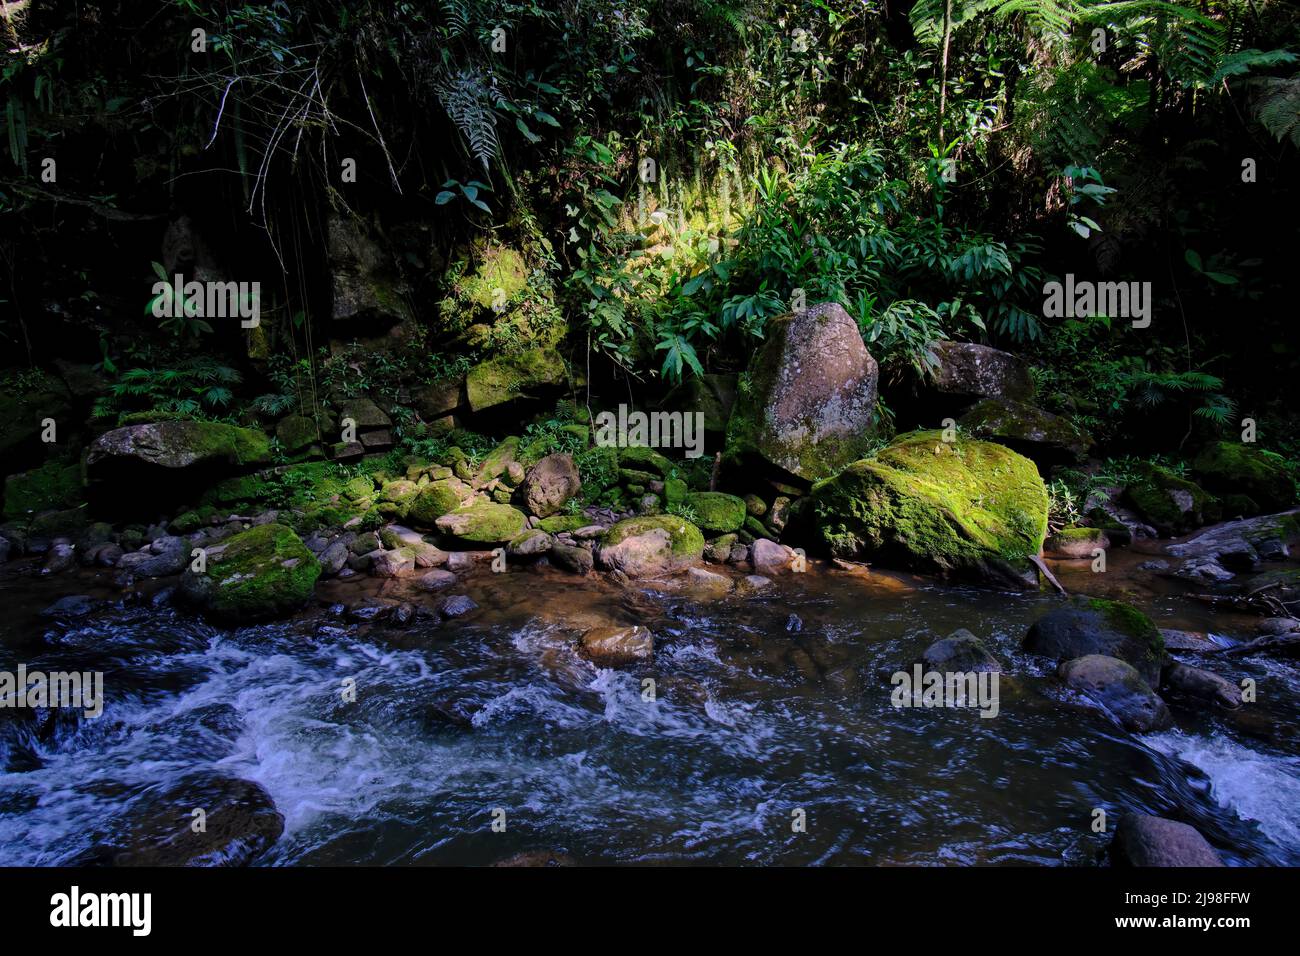 Interior of the central jungle of Peru, dense vegetation with rivers and waterfalls full of purity and tranquility. Stock Photo